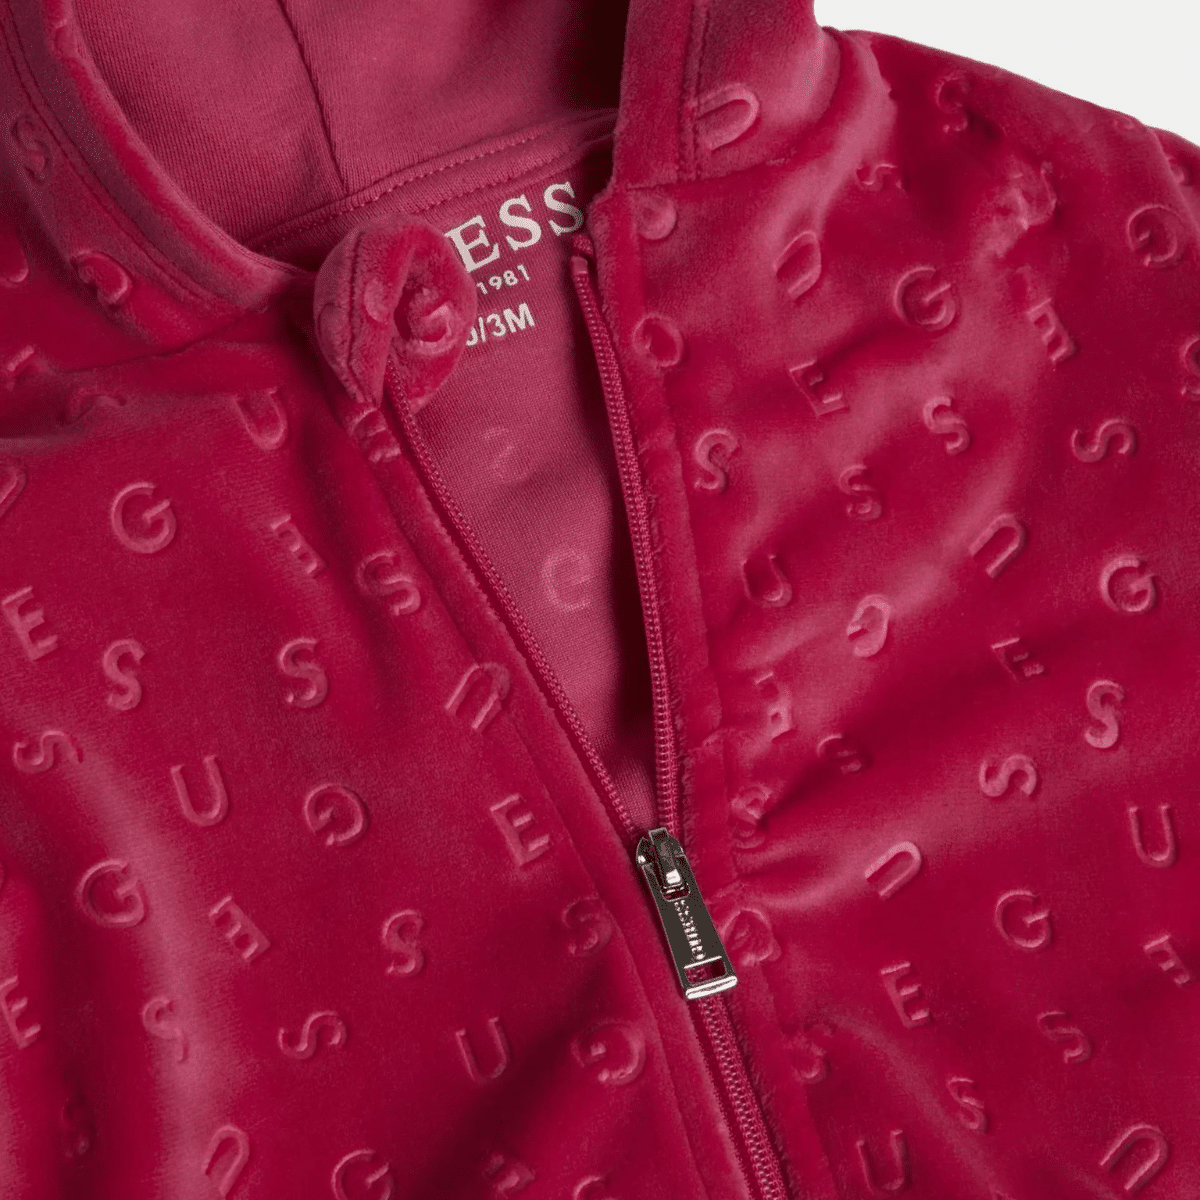 Guess baby girl red chenille hoodie